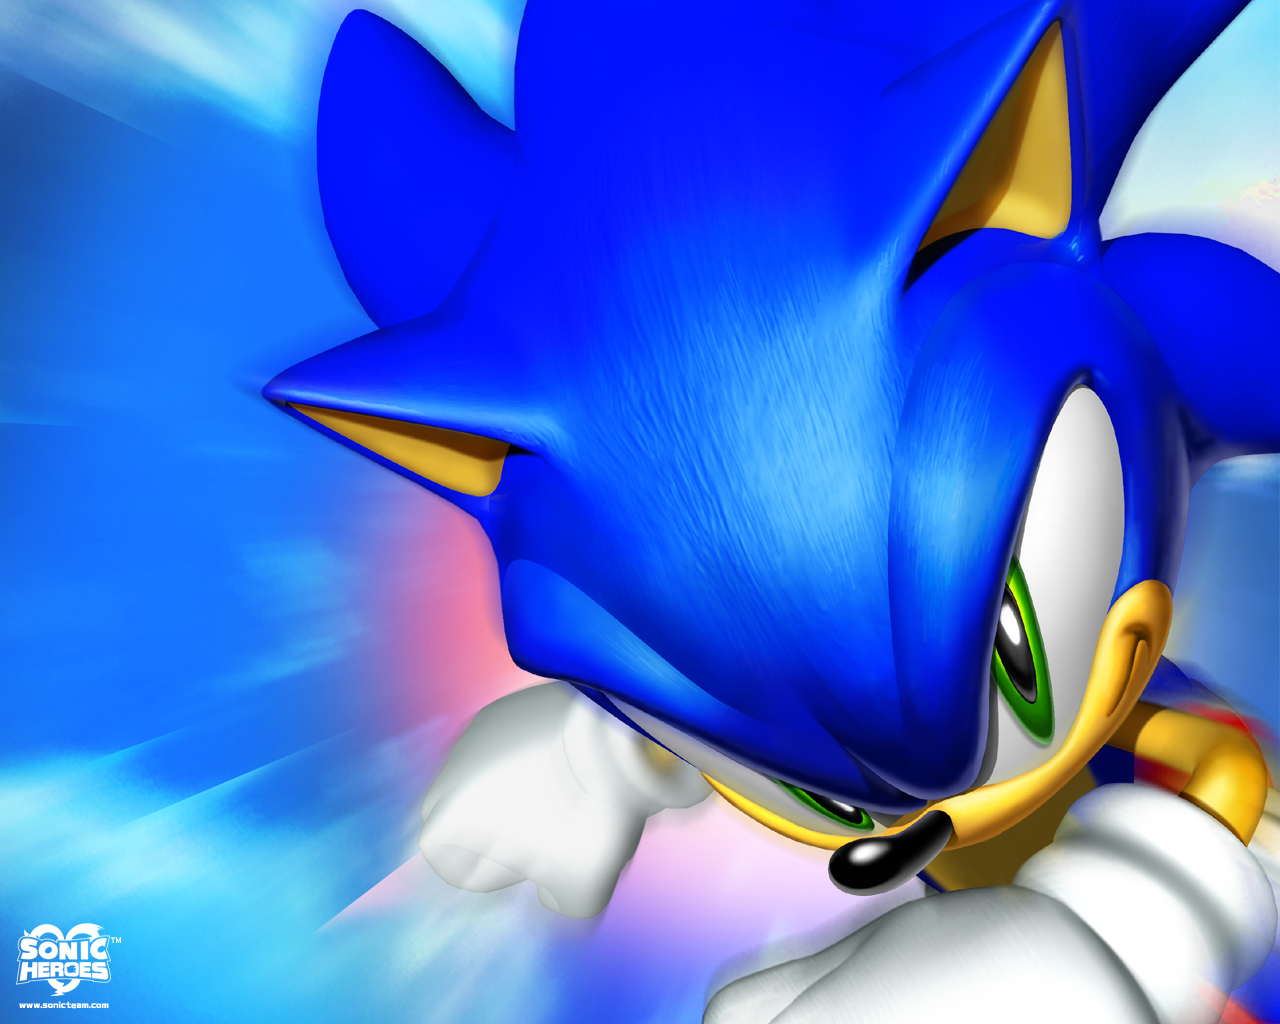 sonic heroes wallpaper,sonic the hedgehog,blue,fictional character,electric blue,graphic design